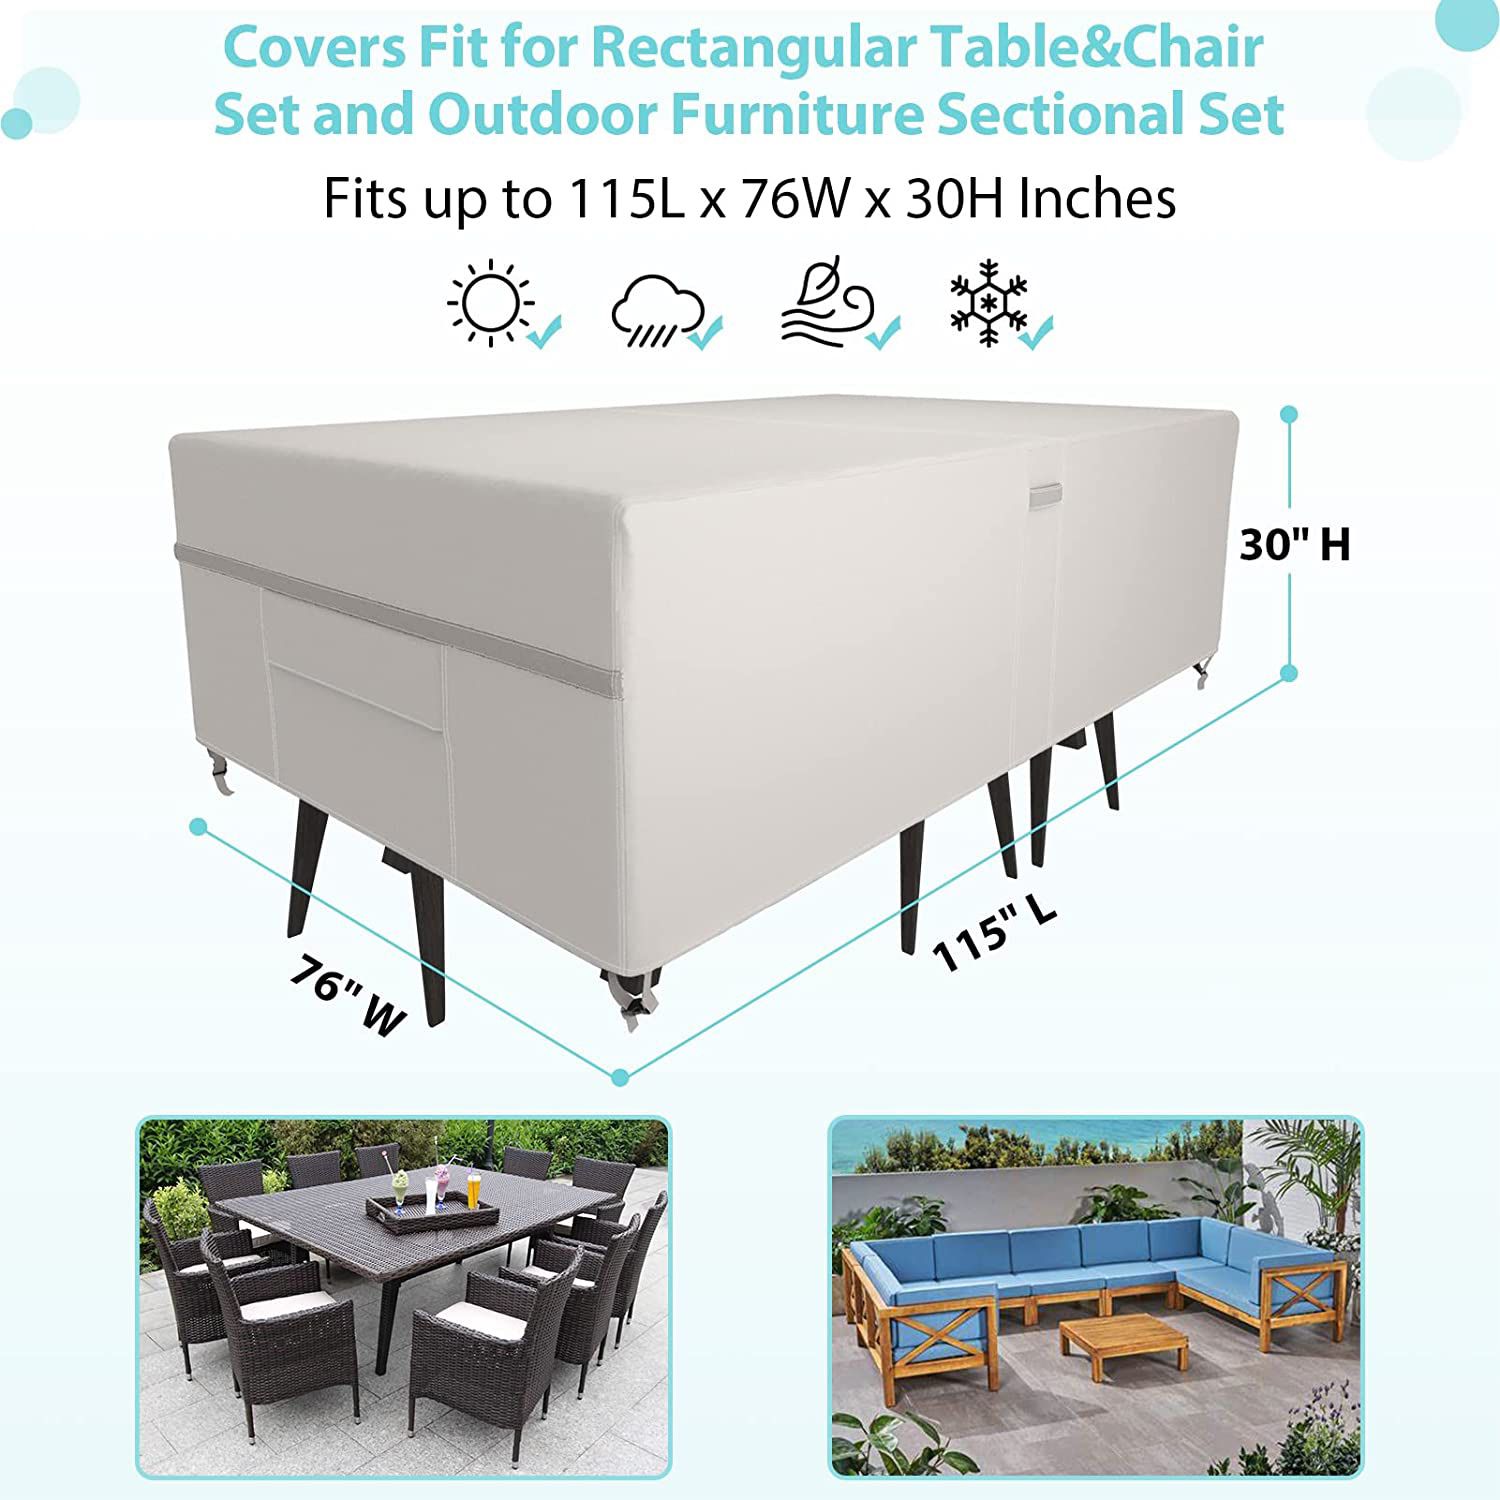 MR. COVER Patio Furniture Sectional Set Covers Waterproof, Outdoor Dining Set Cover Rectangular for Outside Table and Chairs, 115L x 76W x 30H, Rip-Re